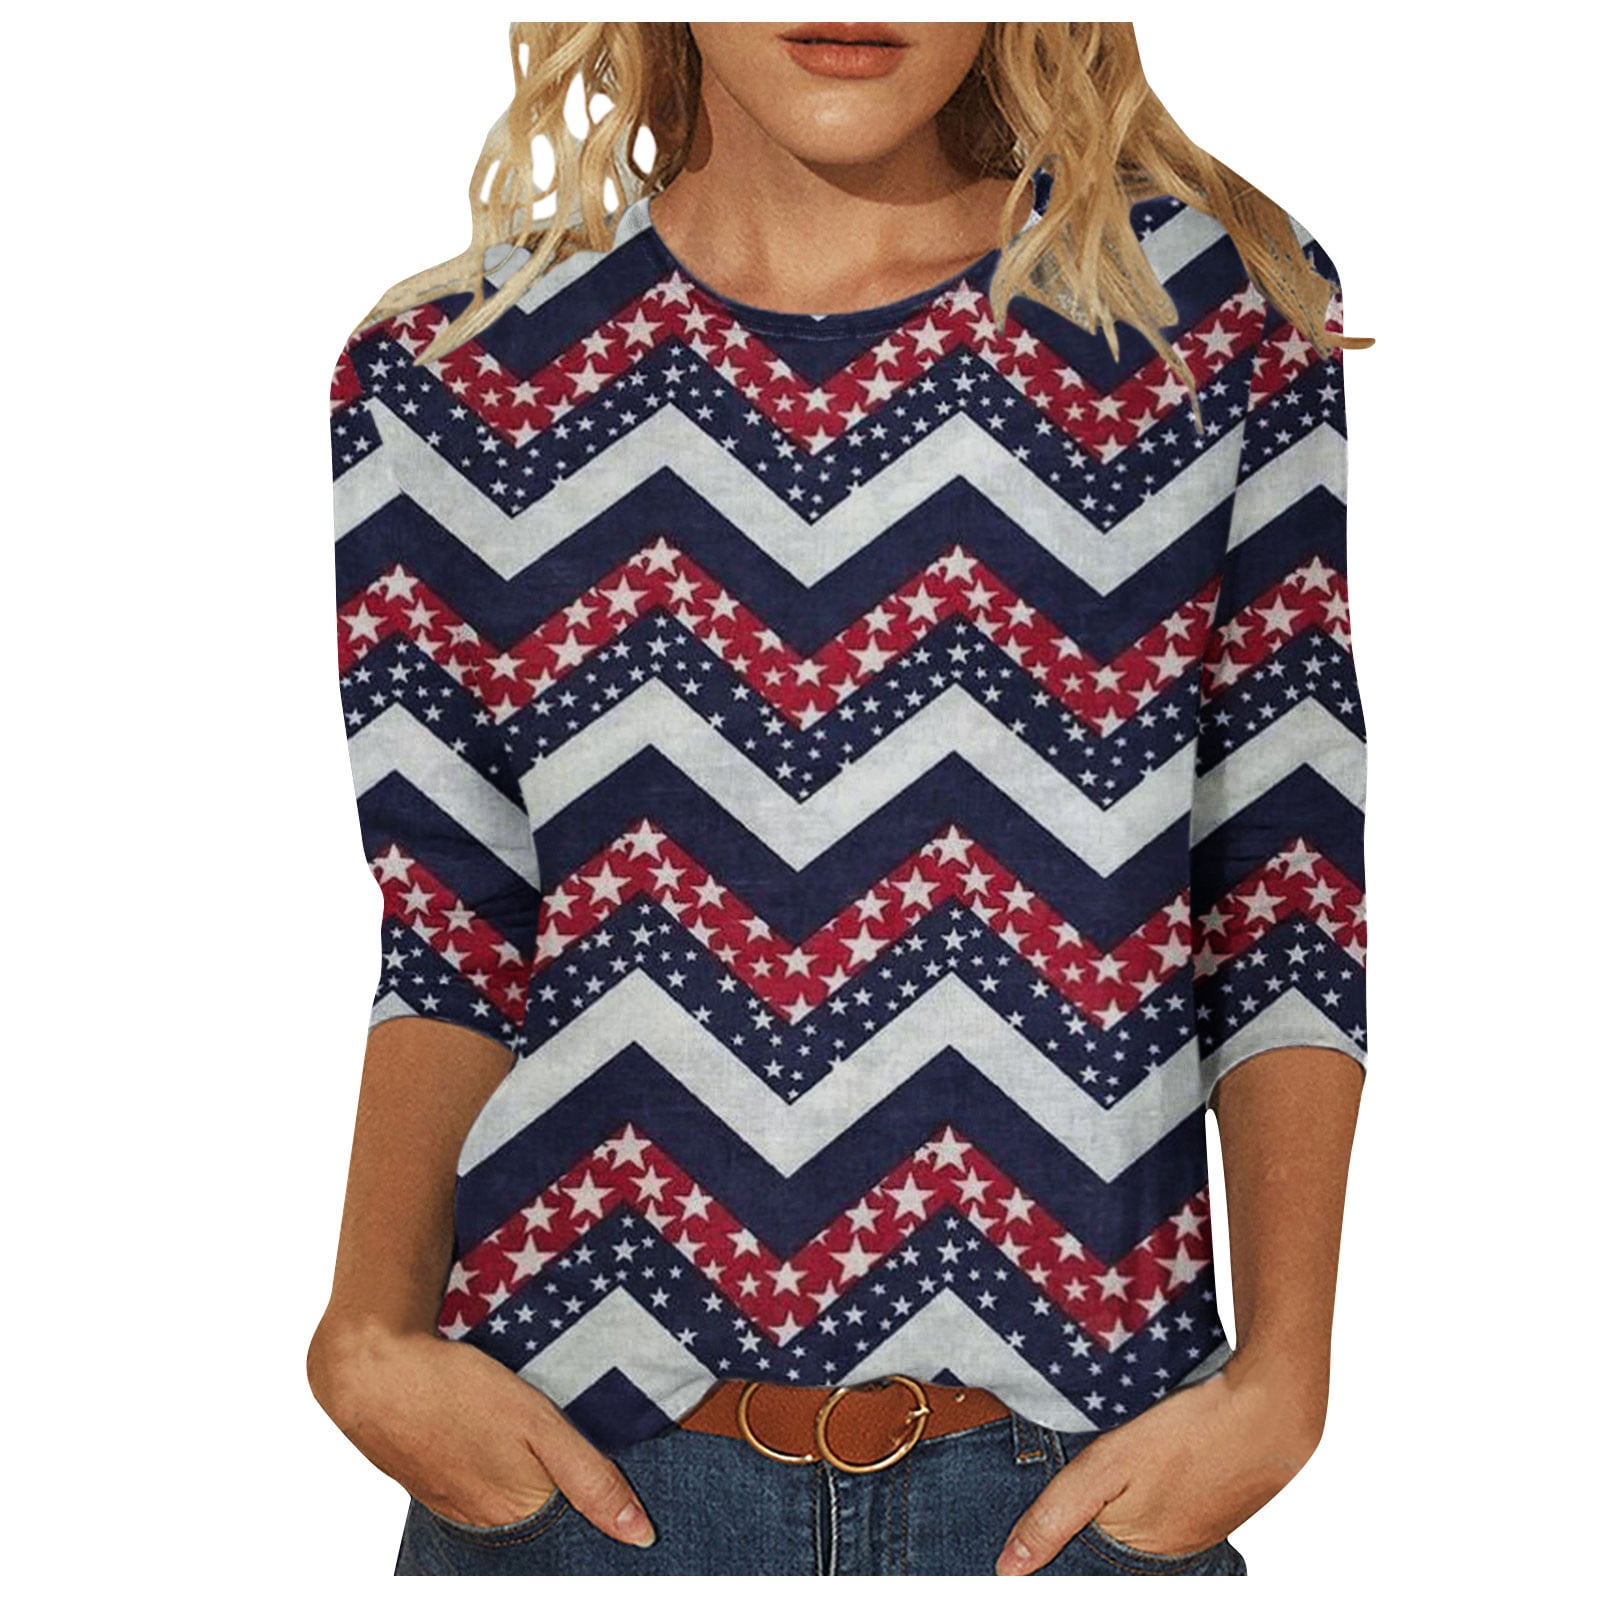 Cream Blouses for Women Patriotic Shirts for Women,Women's 4th Of July ...